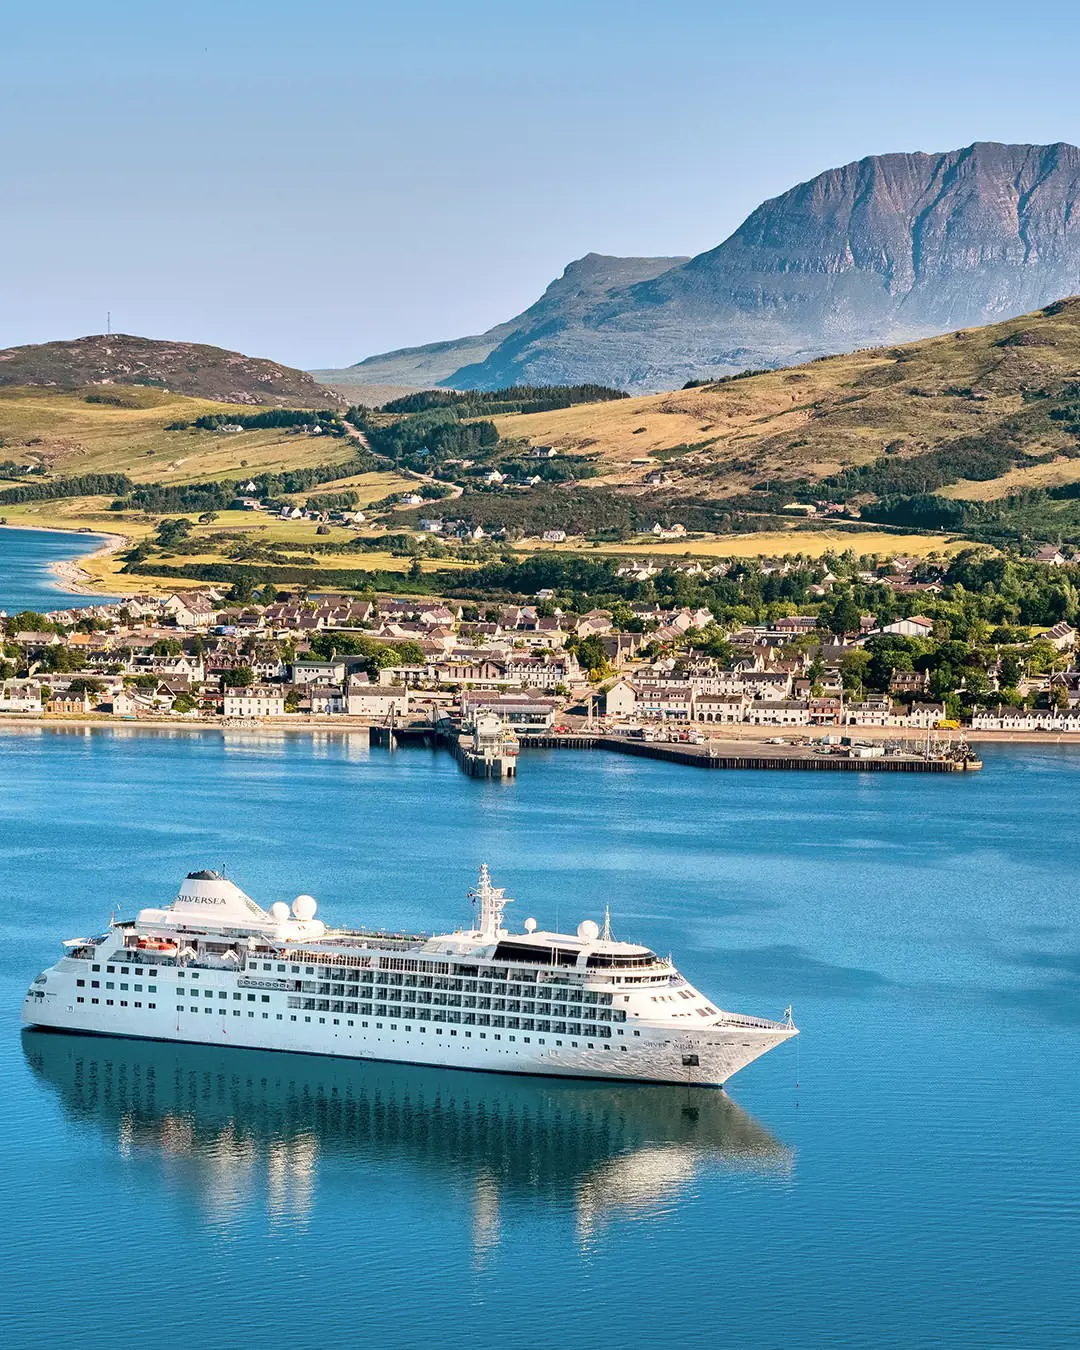 American West Coast journey is the most loved tour by Silversea passengers.